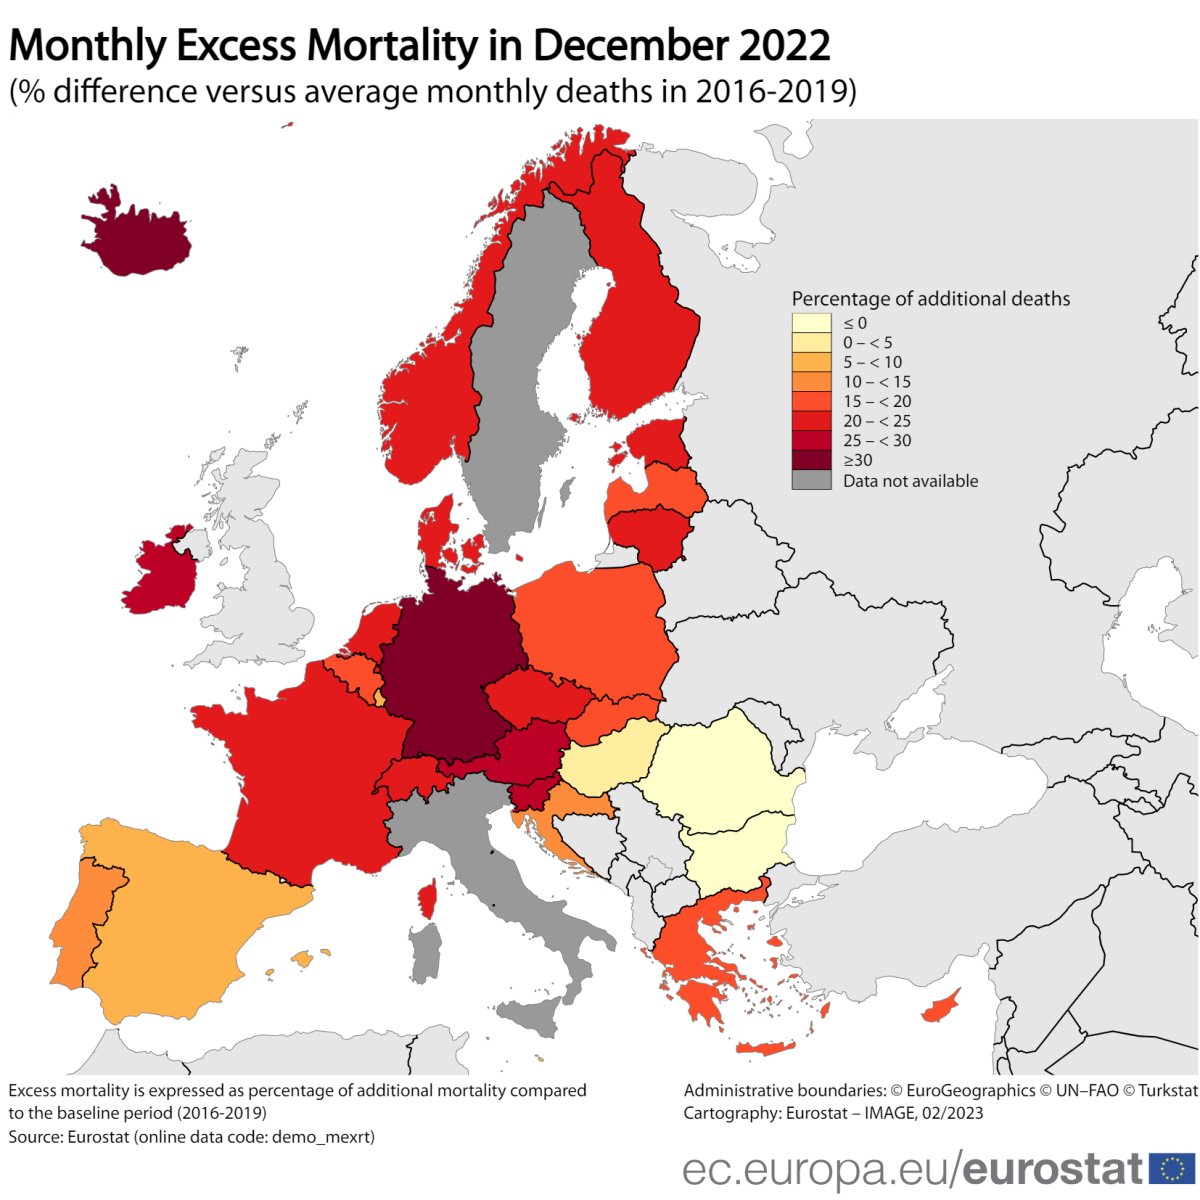 Significant increase in Excess Mortality in Europe (AND around the world)... 

#RNAediting #mRNA #Nuremberg2Now